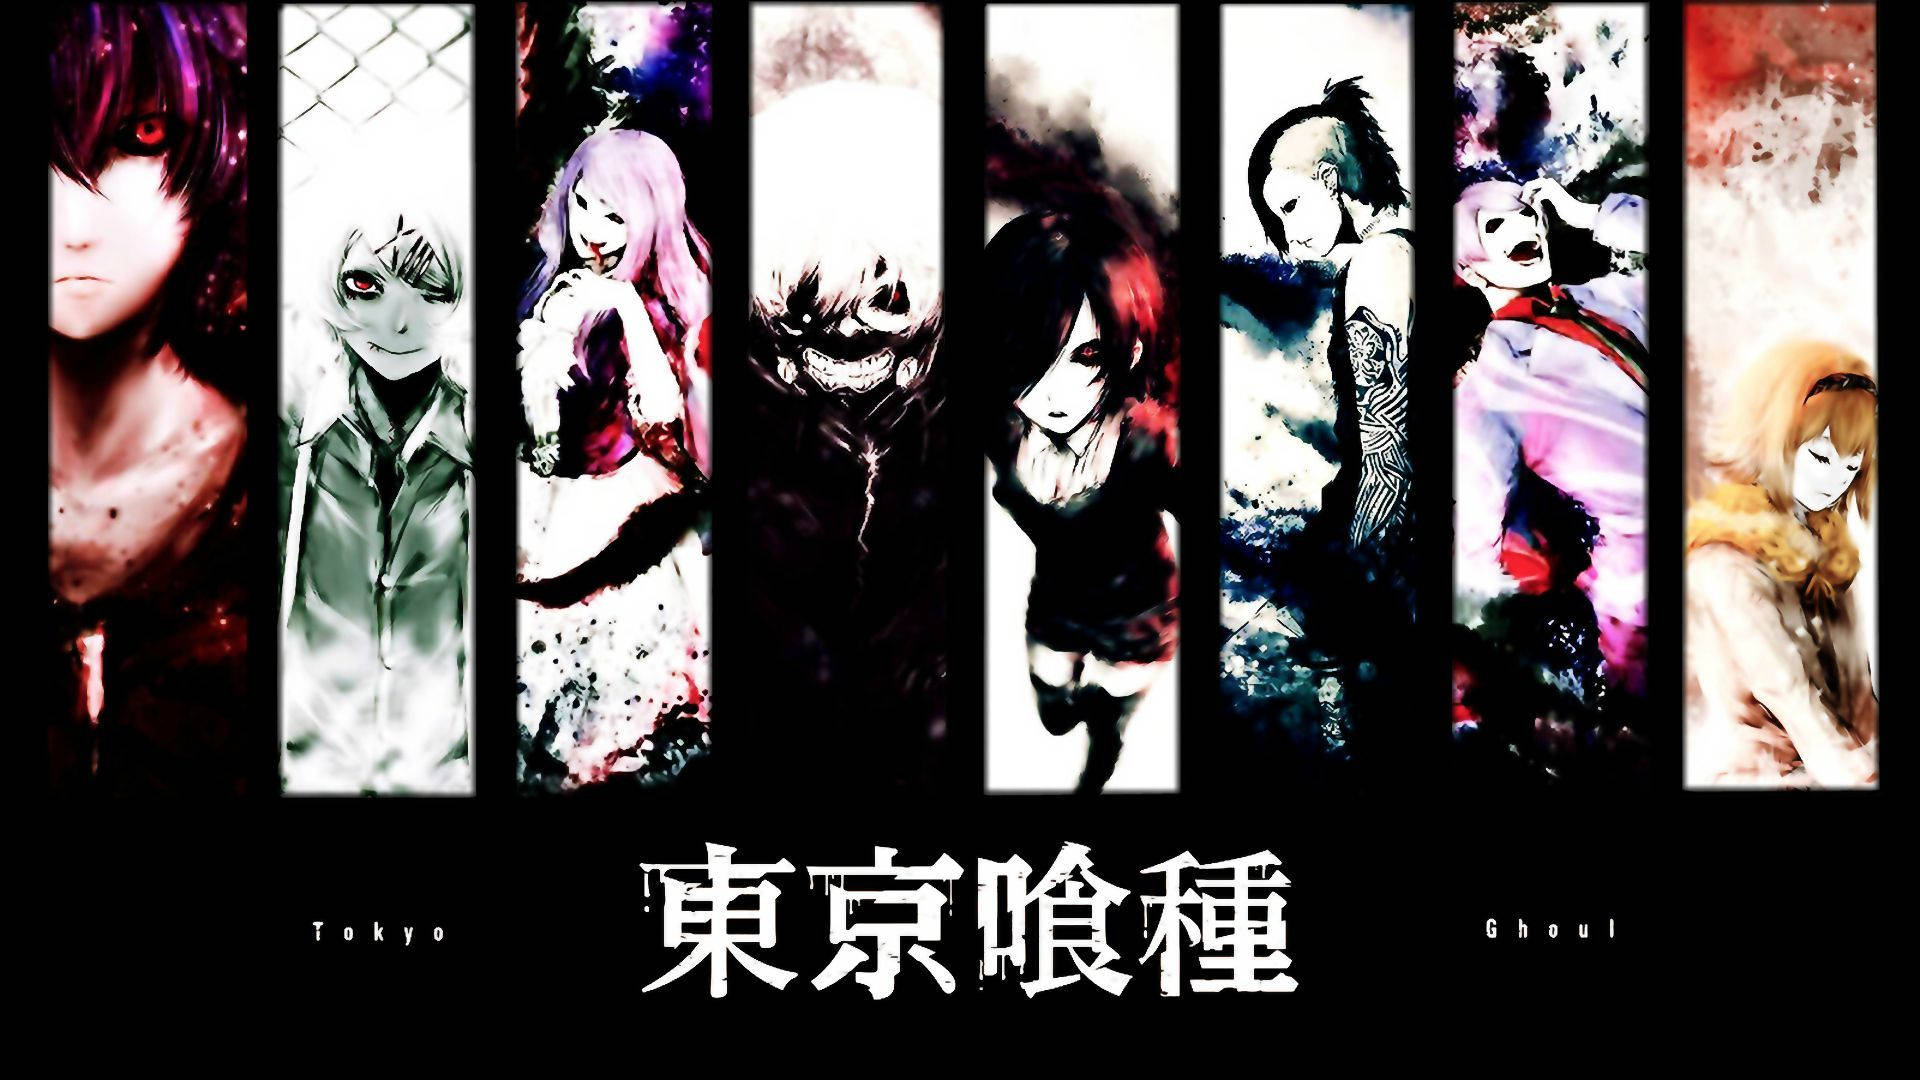 Tokyo Ghoul Characters Collage Background